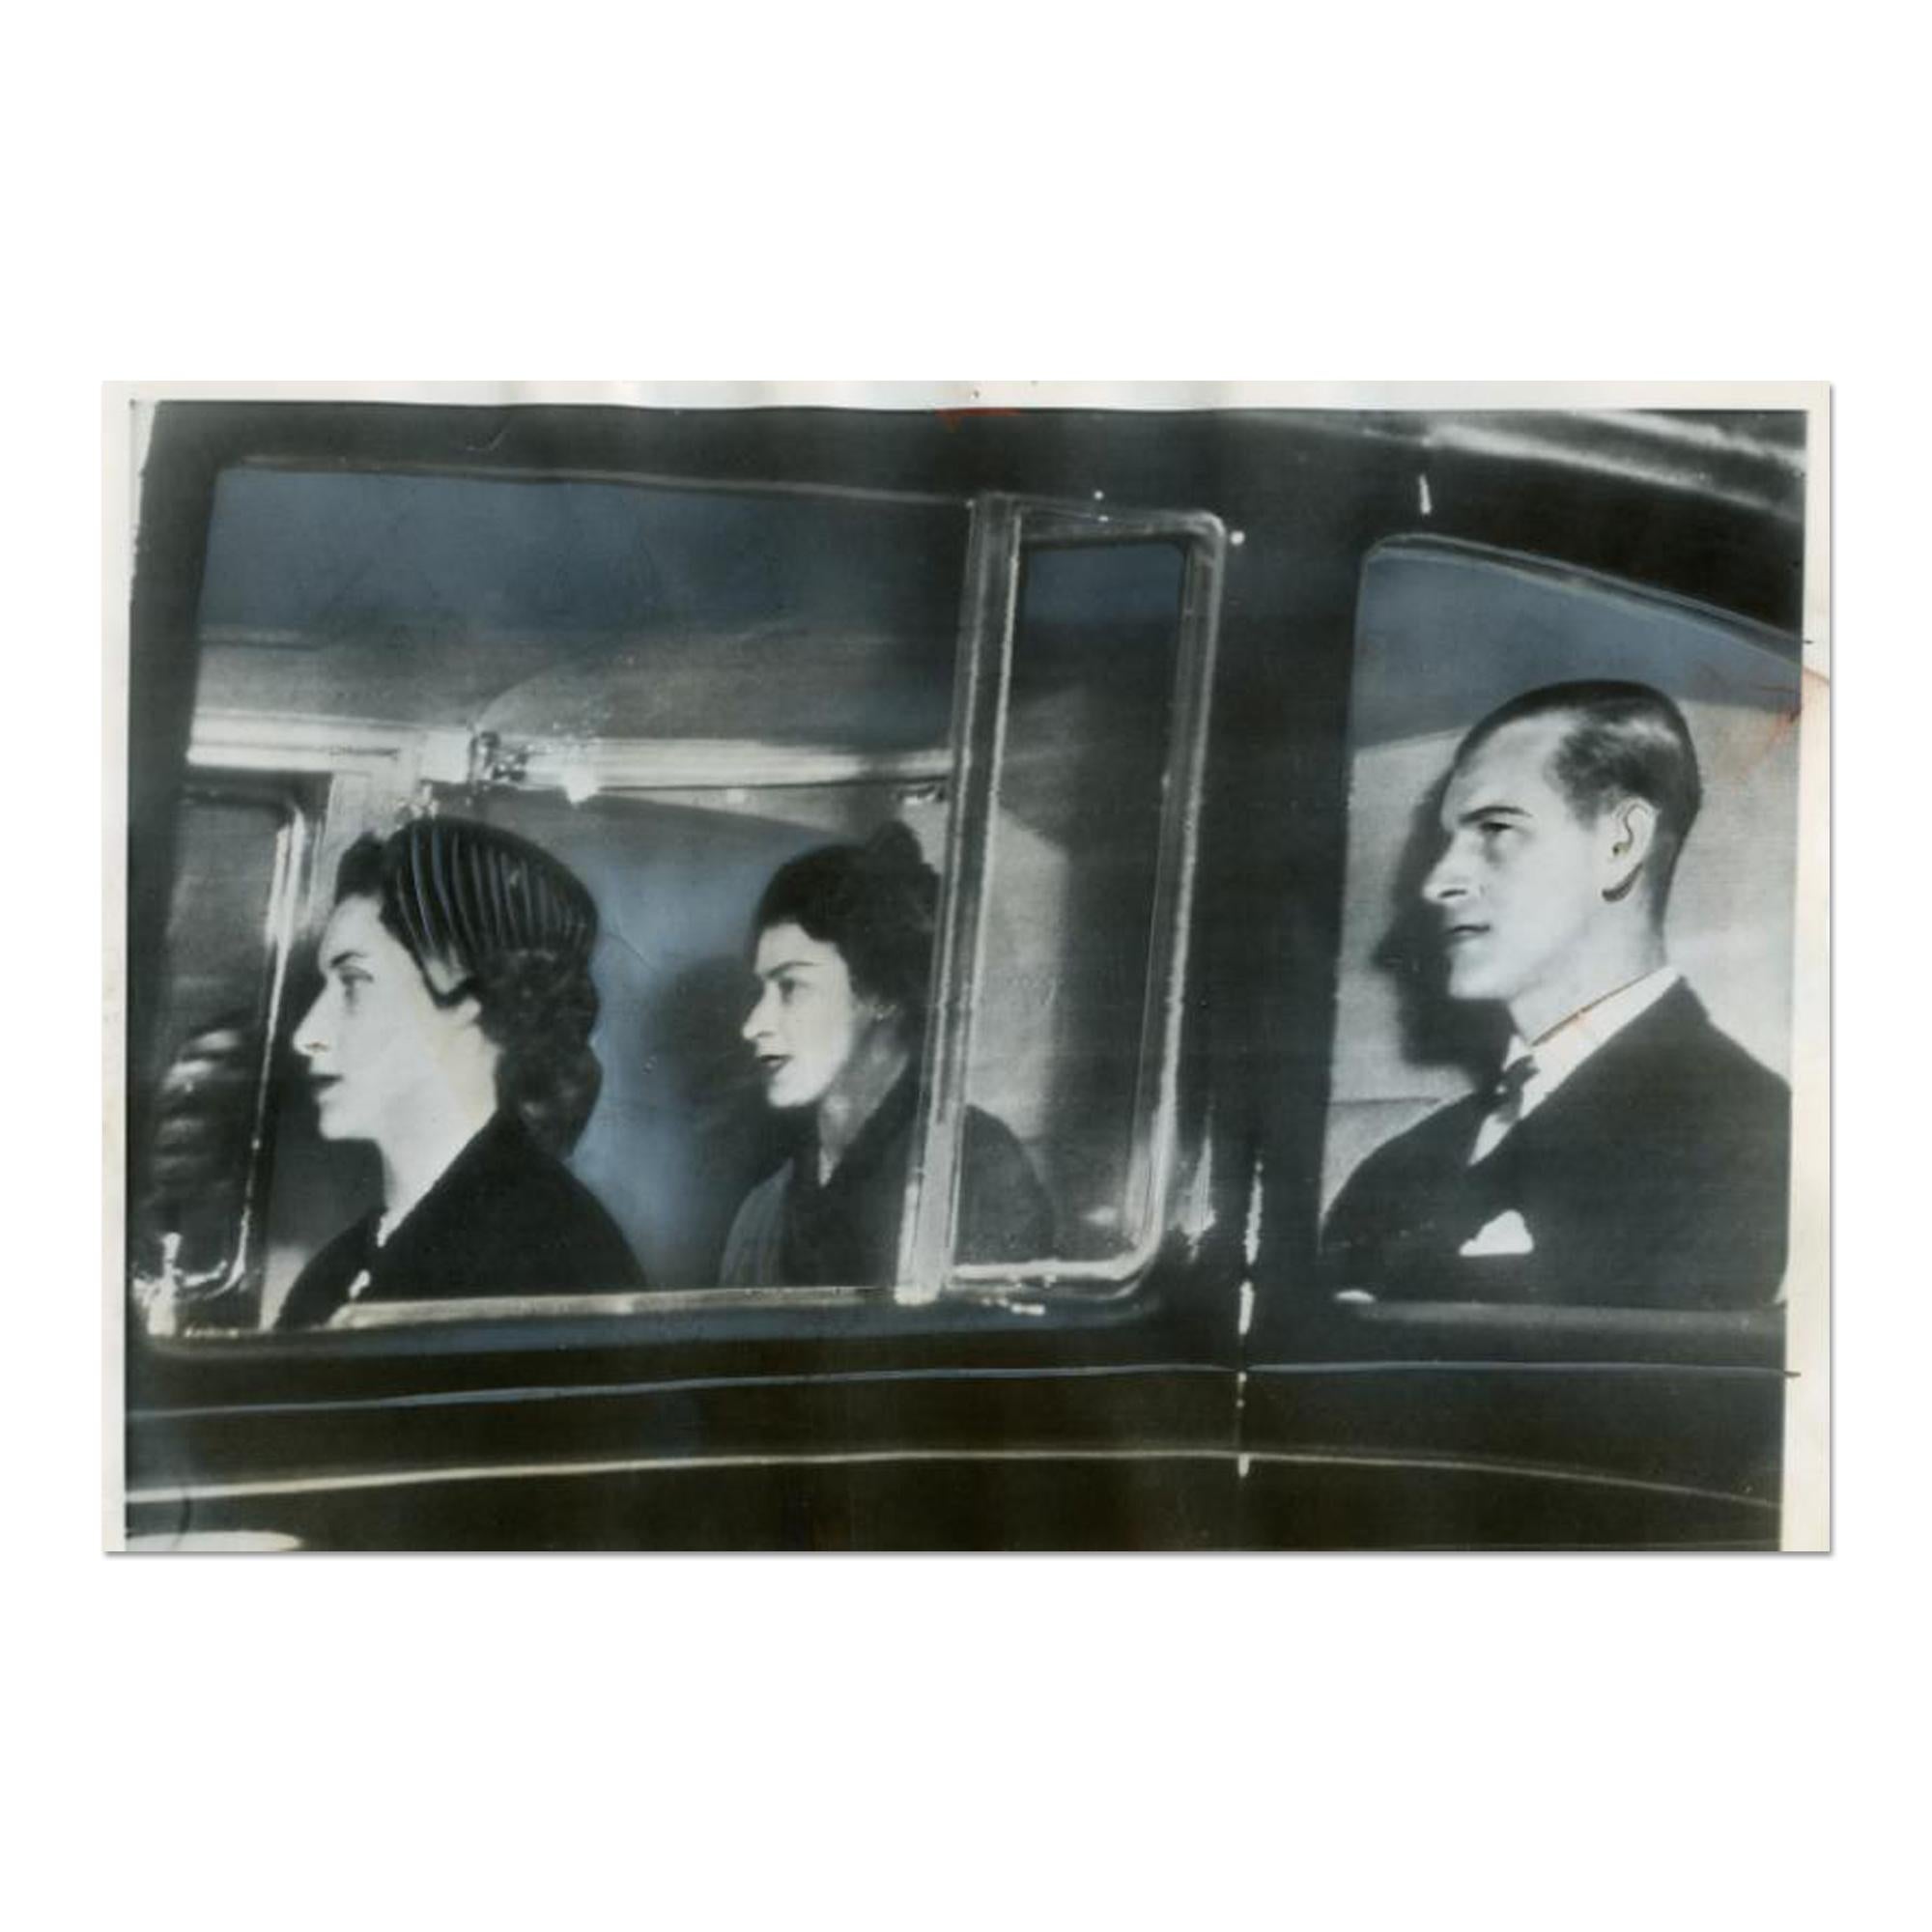 Thomas Ruff (German, b. 1958)
Queen in Car, 2021
Medium: Double-sided digital pigment print on cardboard (glossy front, matt verso)
Dimensions: 15 x 20 cm
Edition of 30: Hand-signed and numbered verso
Condition: Excellent